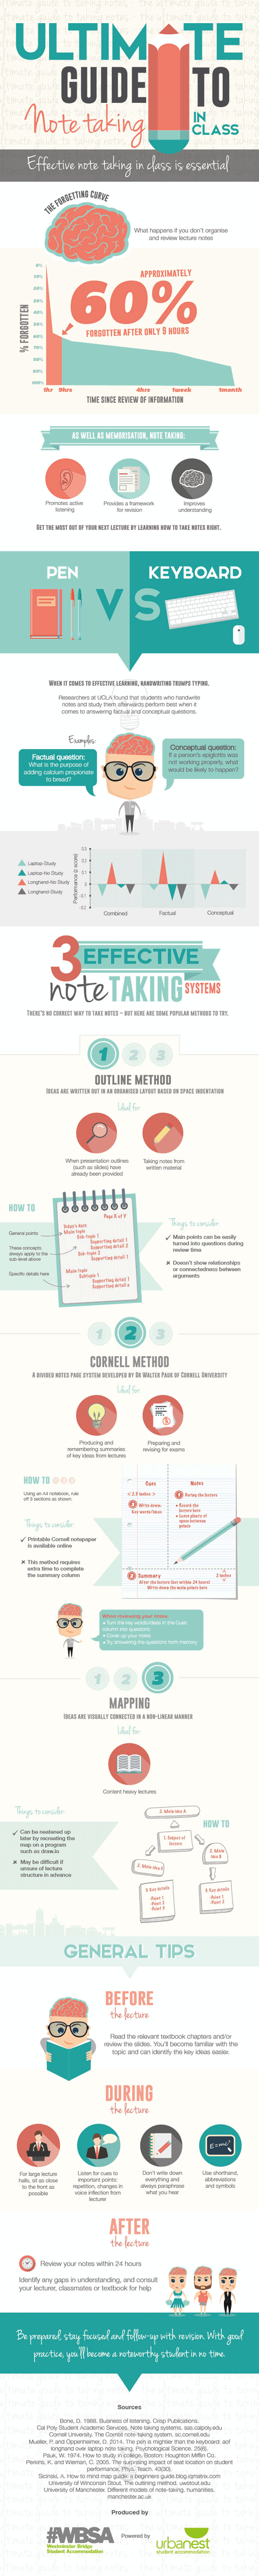 Guide to Note Taking in Class Infographic